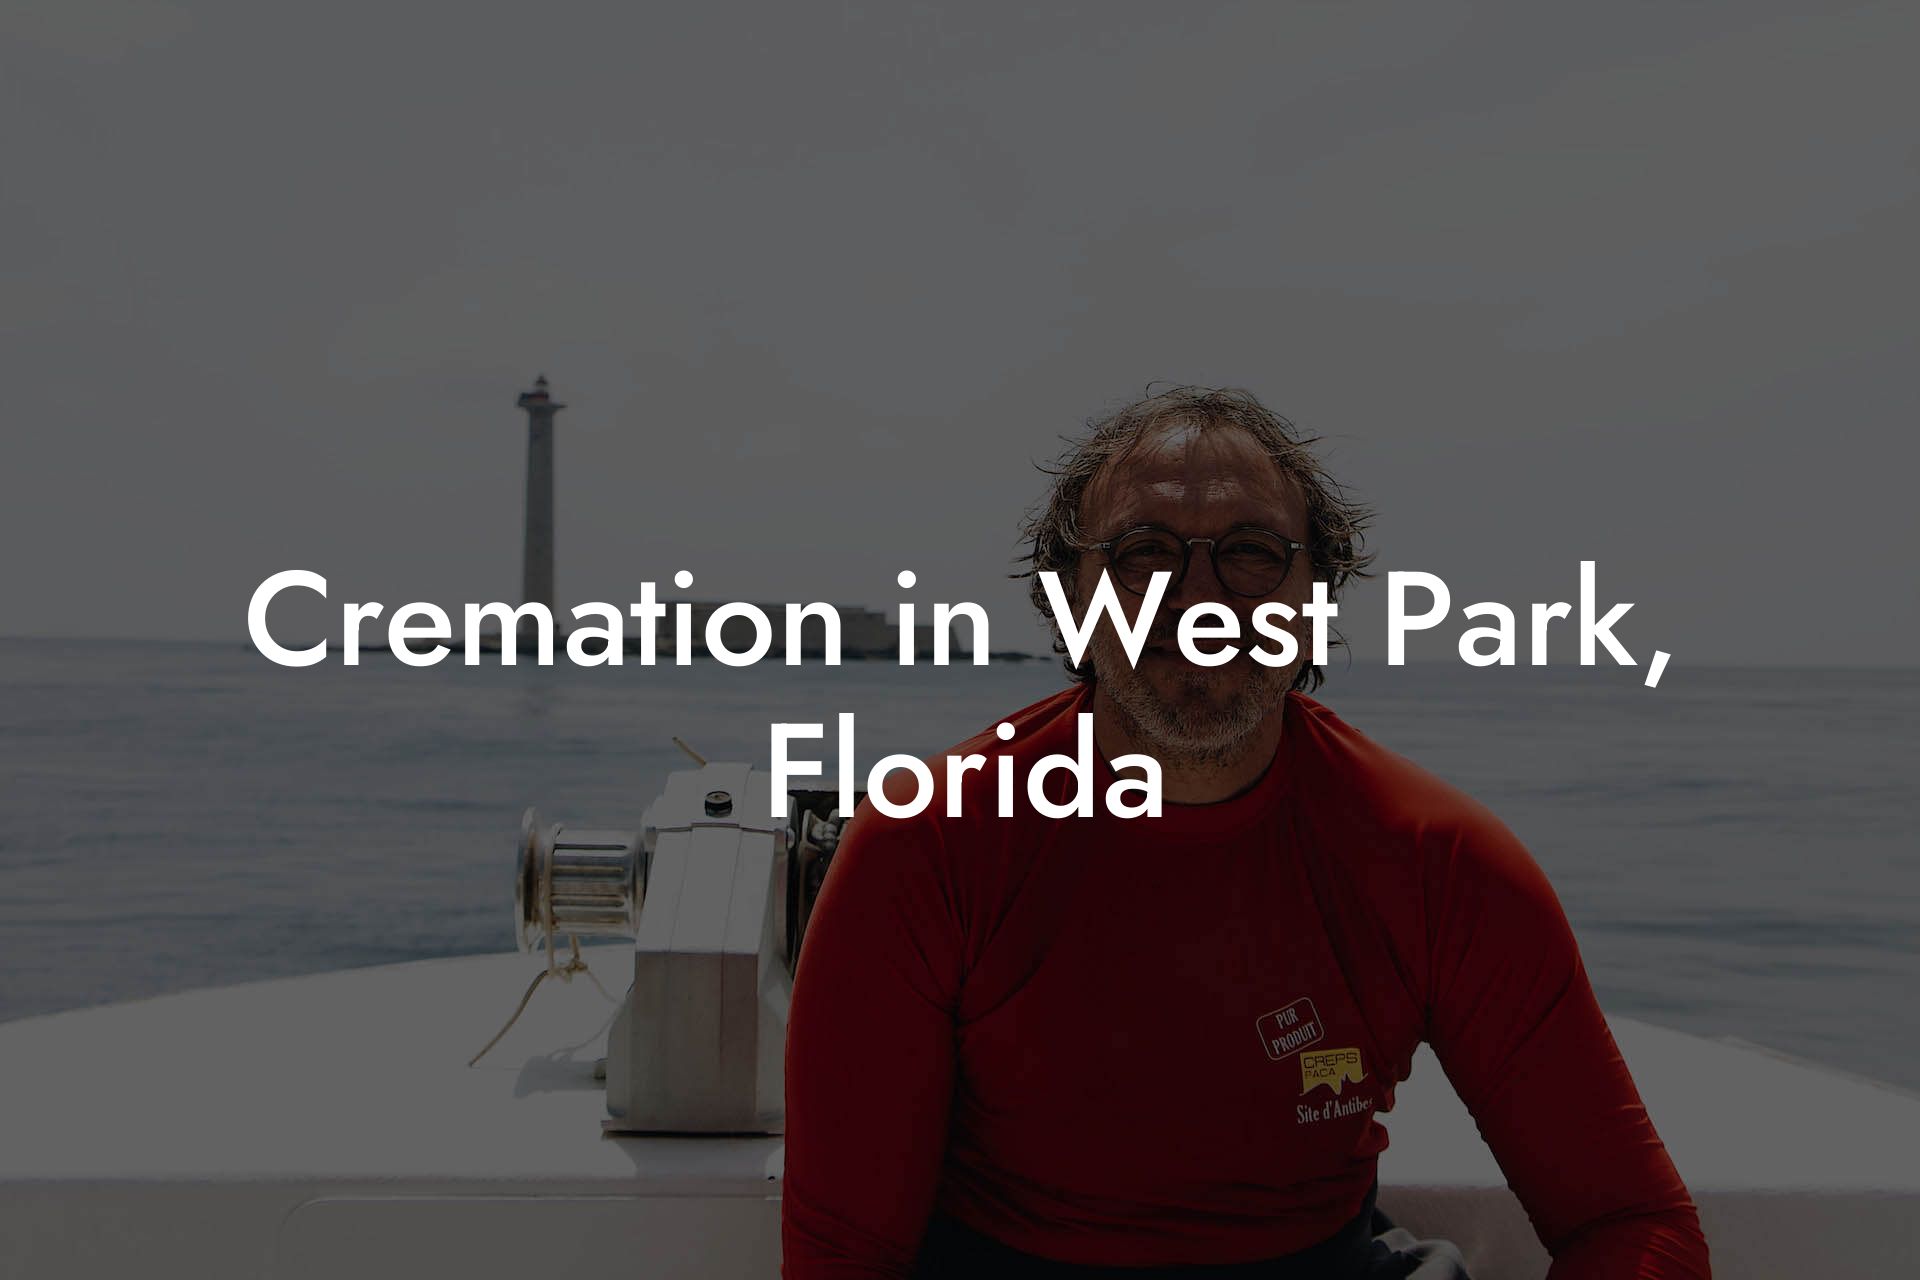 Cremation in West Park, Florida